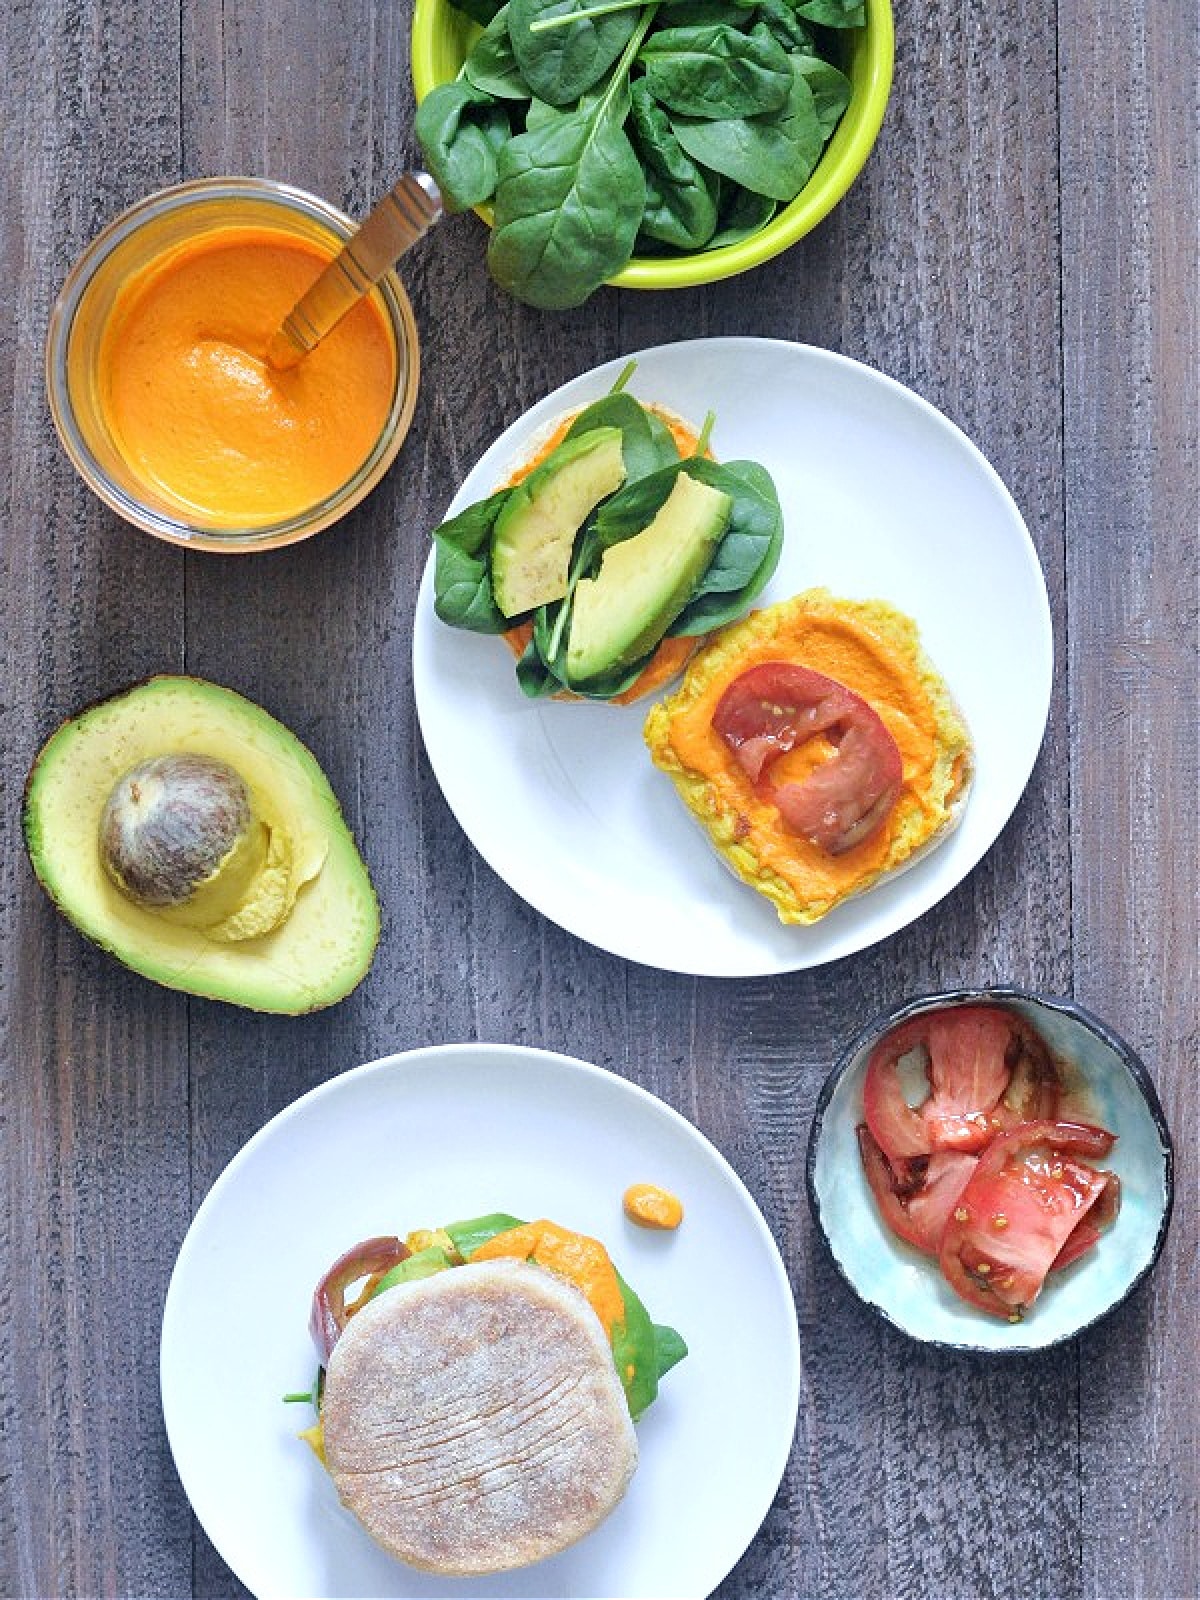 Overhead view of two vegan breakfast sandwiches on white plates, one open faced to show ingredients (Romesco sauce, spinach, tomato slices, vegan "egg" or tofu, avocado slices).